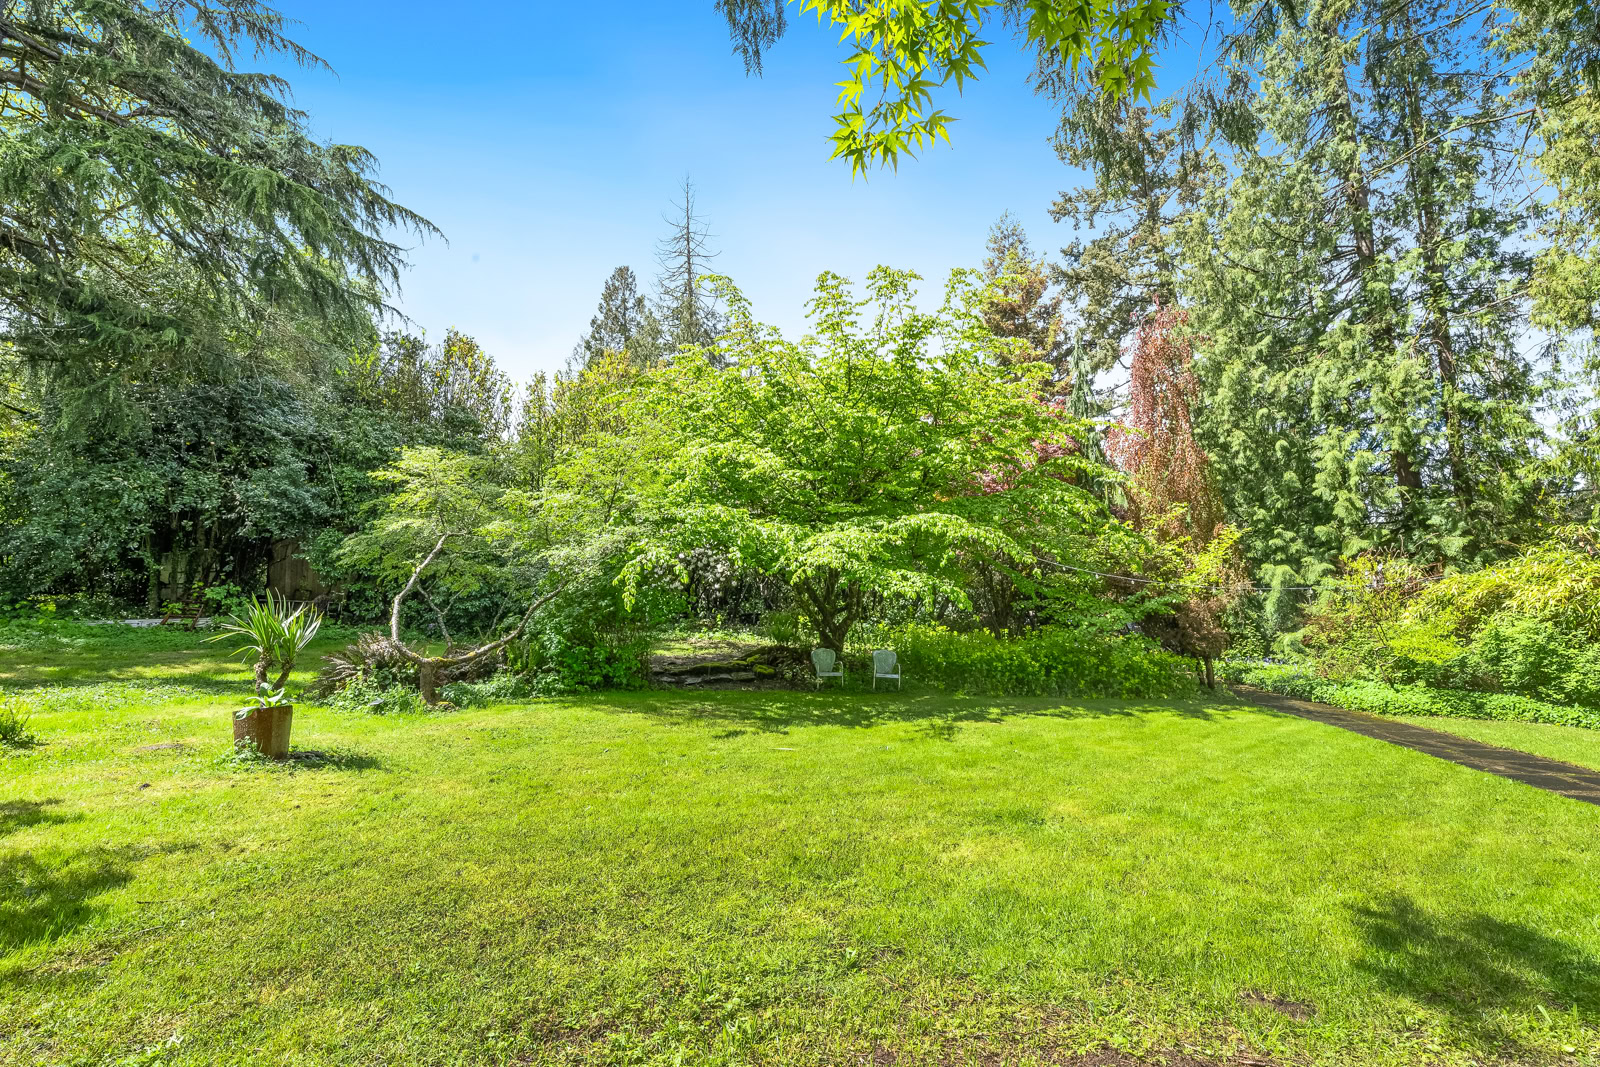 3+ Acre Fairytale Property in the City